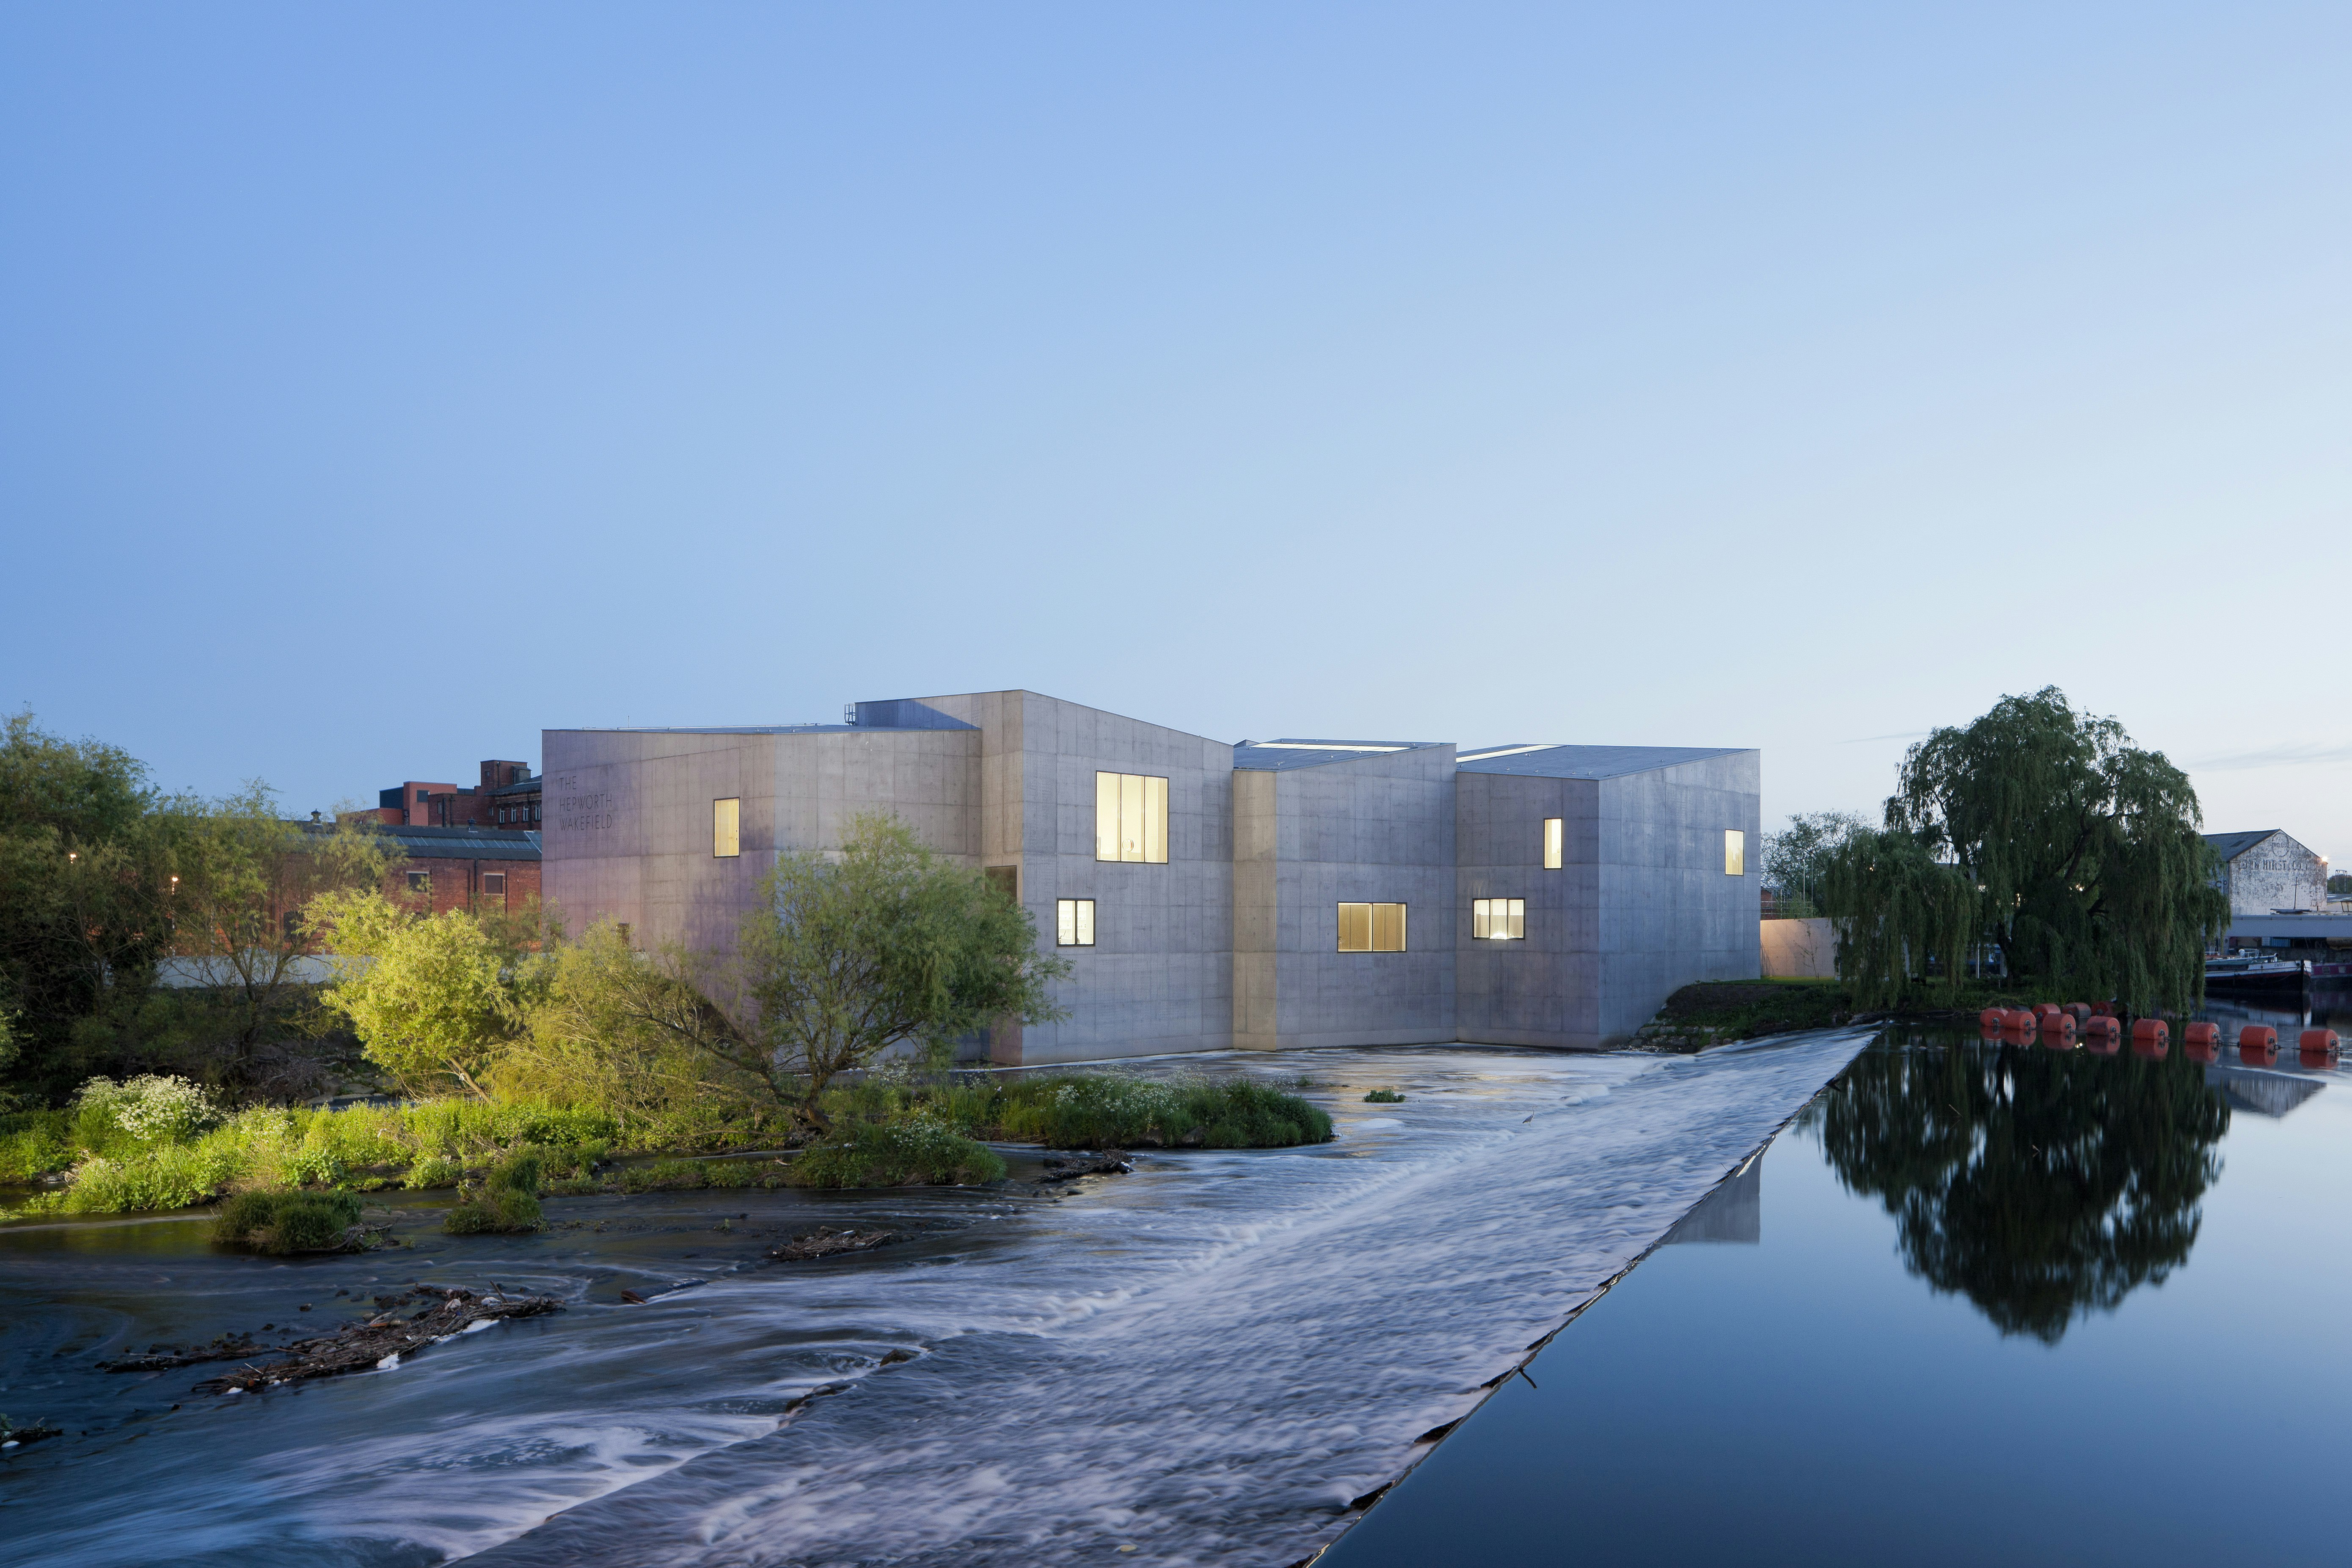 A shot of the minimalist, block-like concrete structure that is The Hepworth Wakefield; trees soften the stark exterior and a glass-like river tumbles down a gentle slope alongside the gallery.